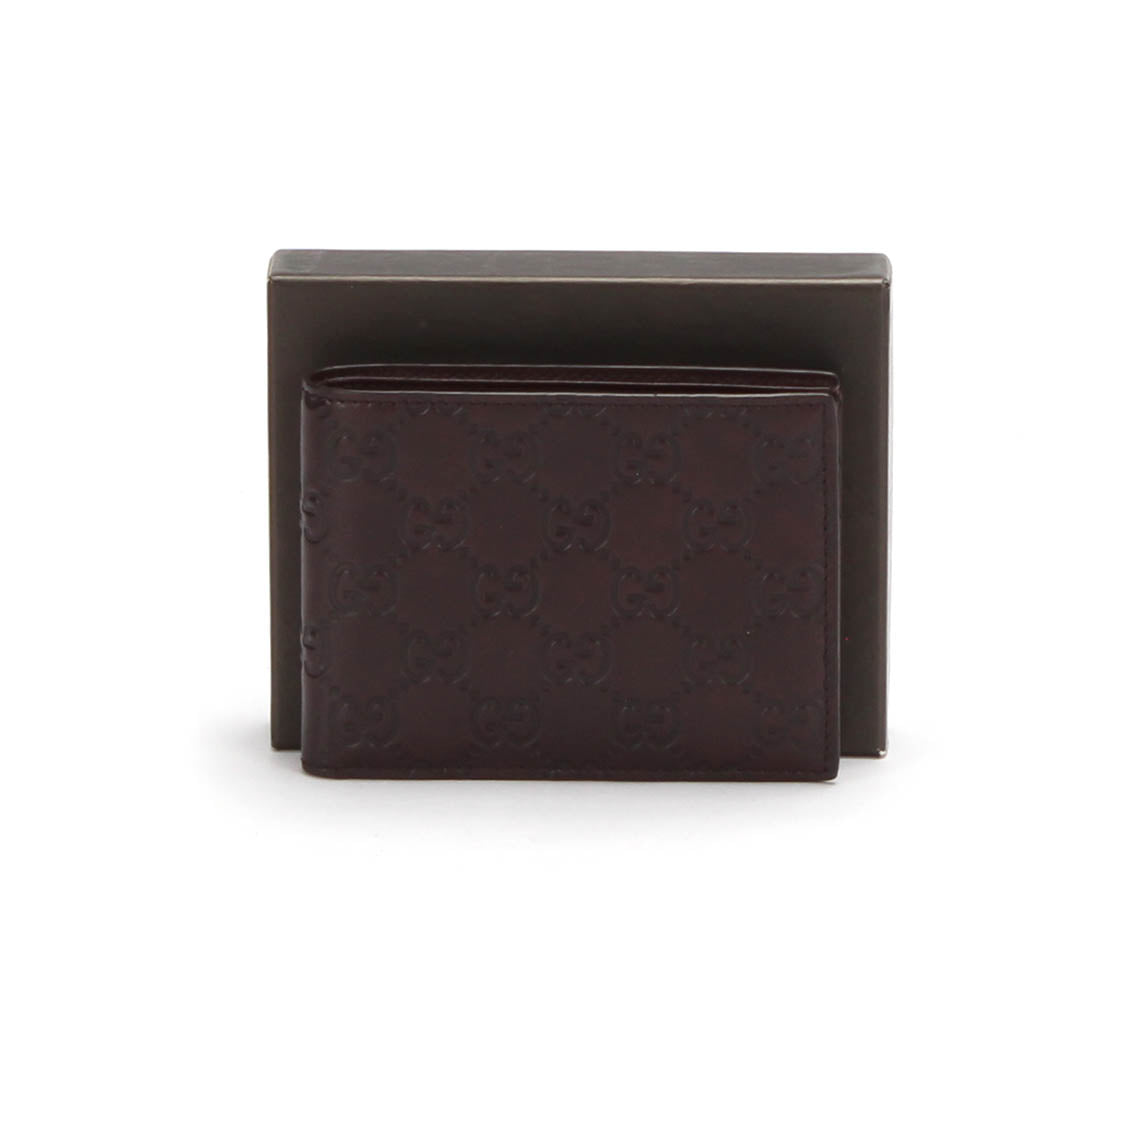 Gucci Guccissima Leather Money Clip Wallet on SALE